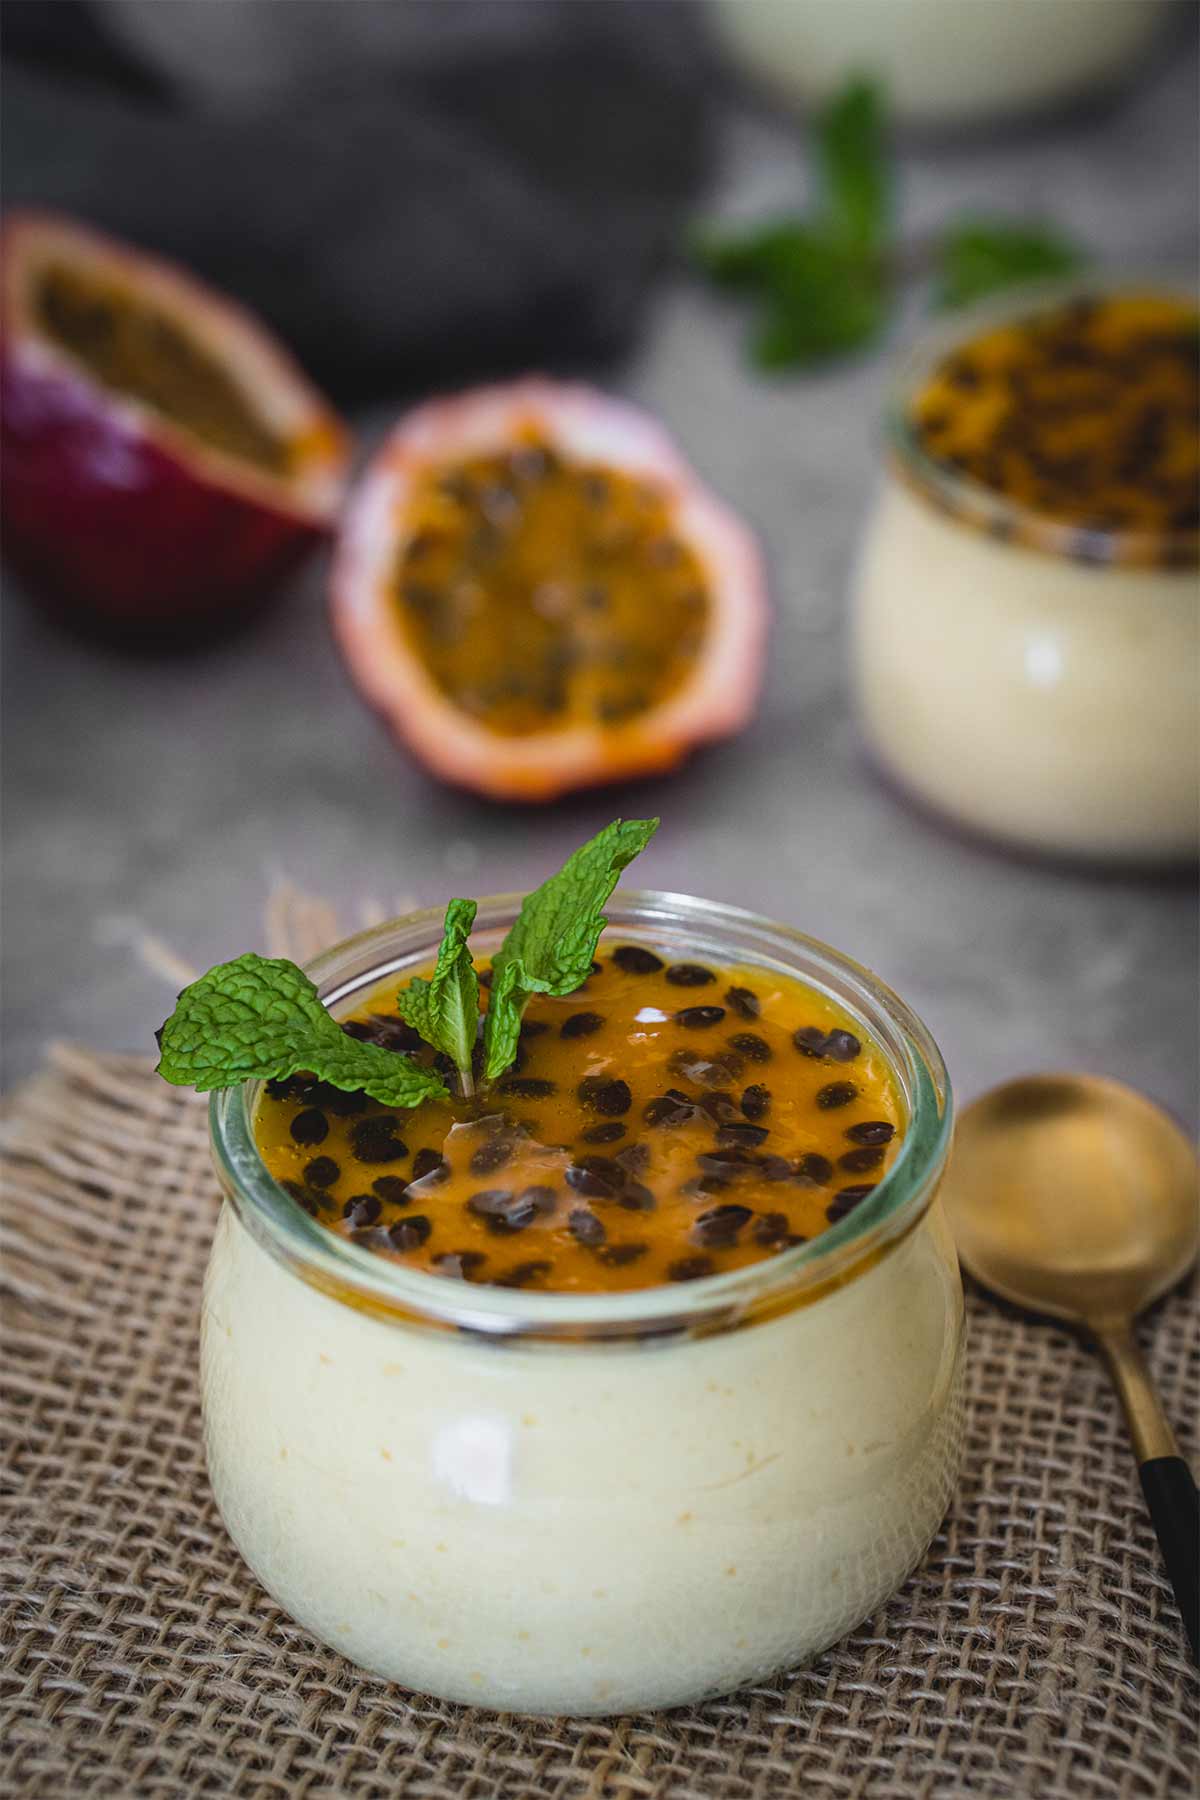 Gentle mango mousse with seeded passion fruit topping